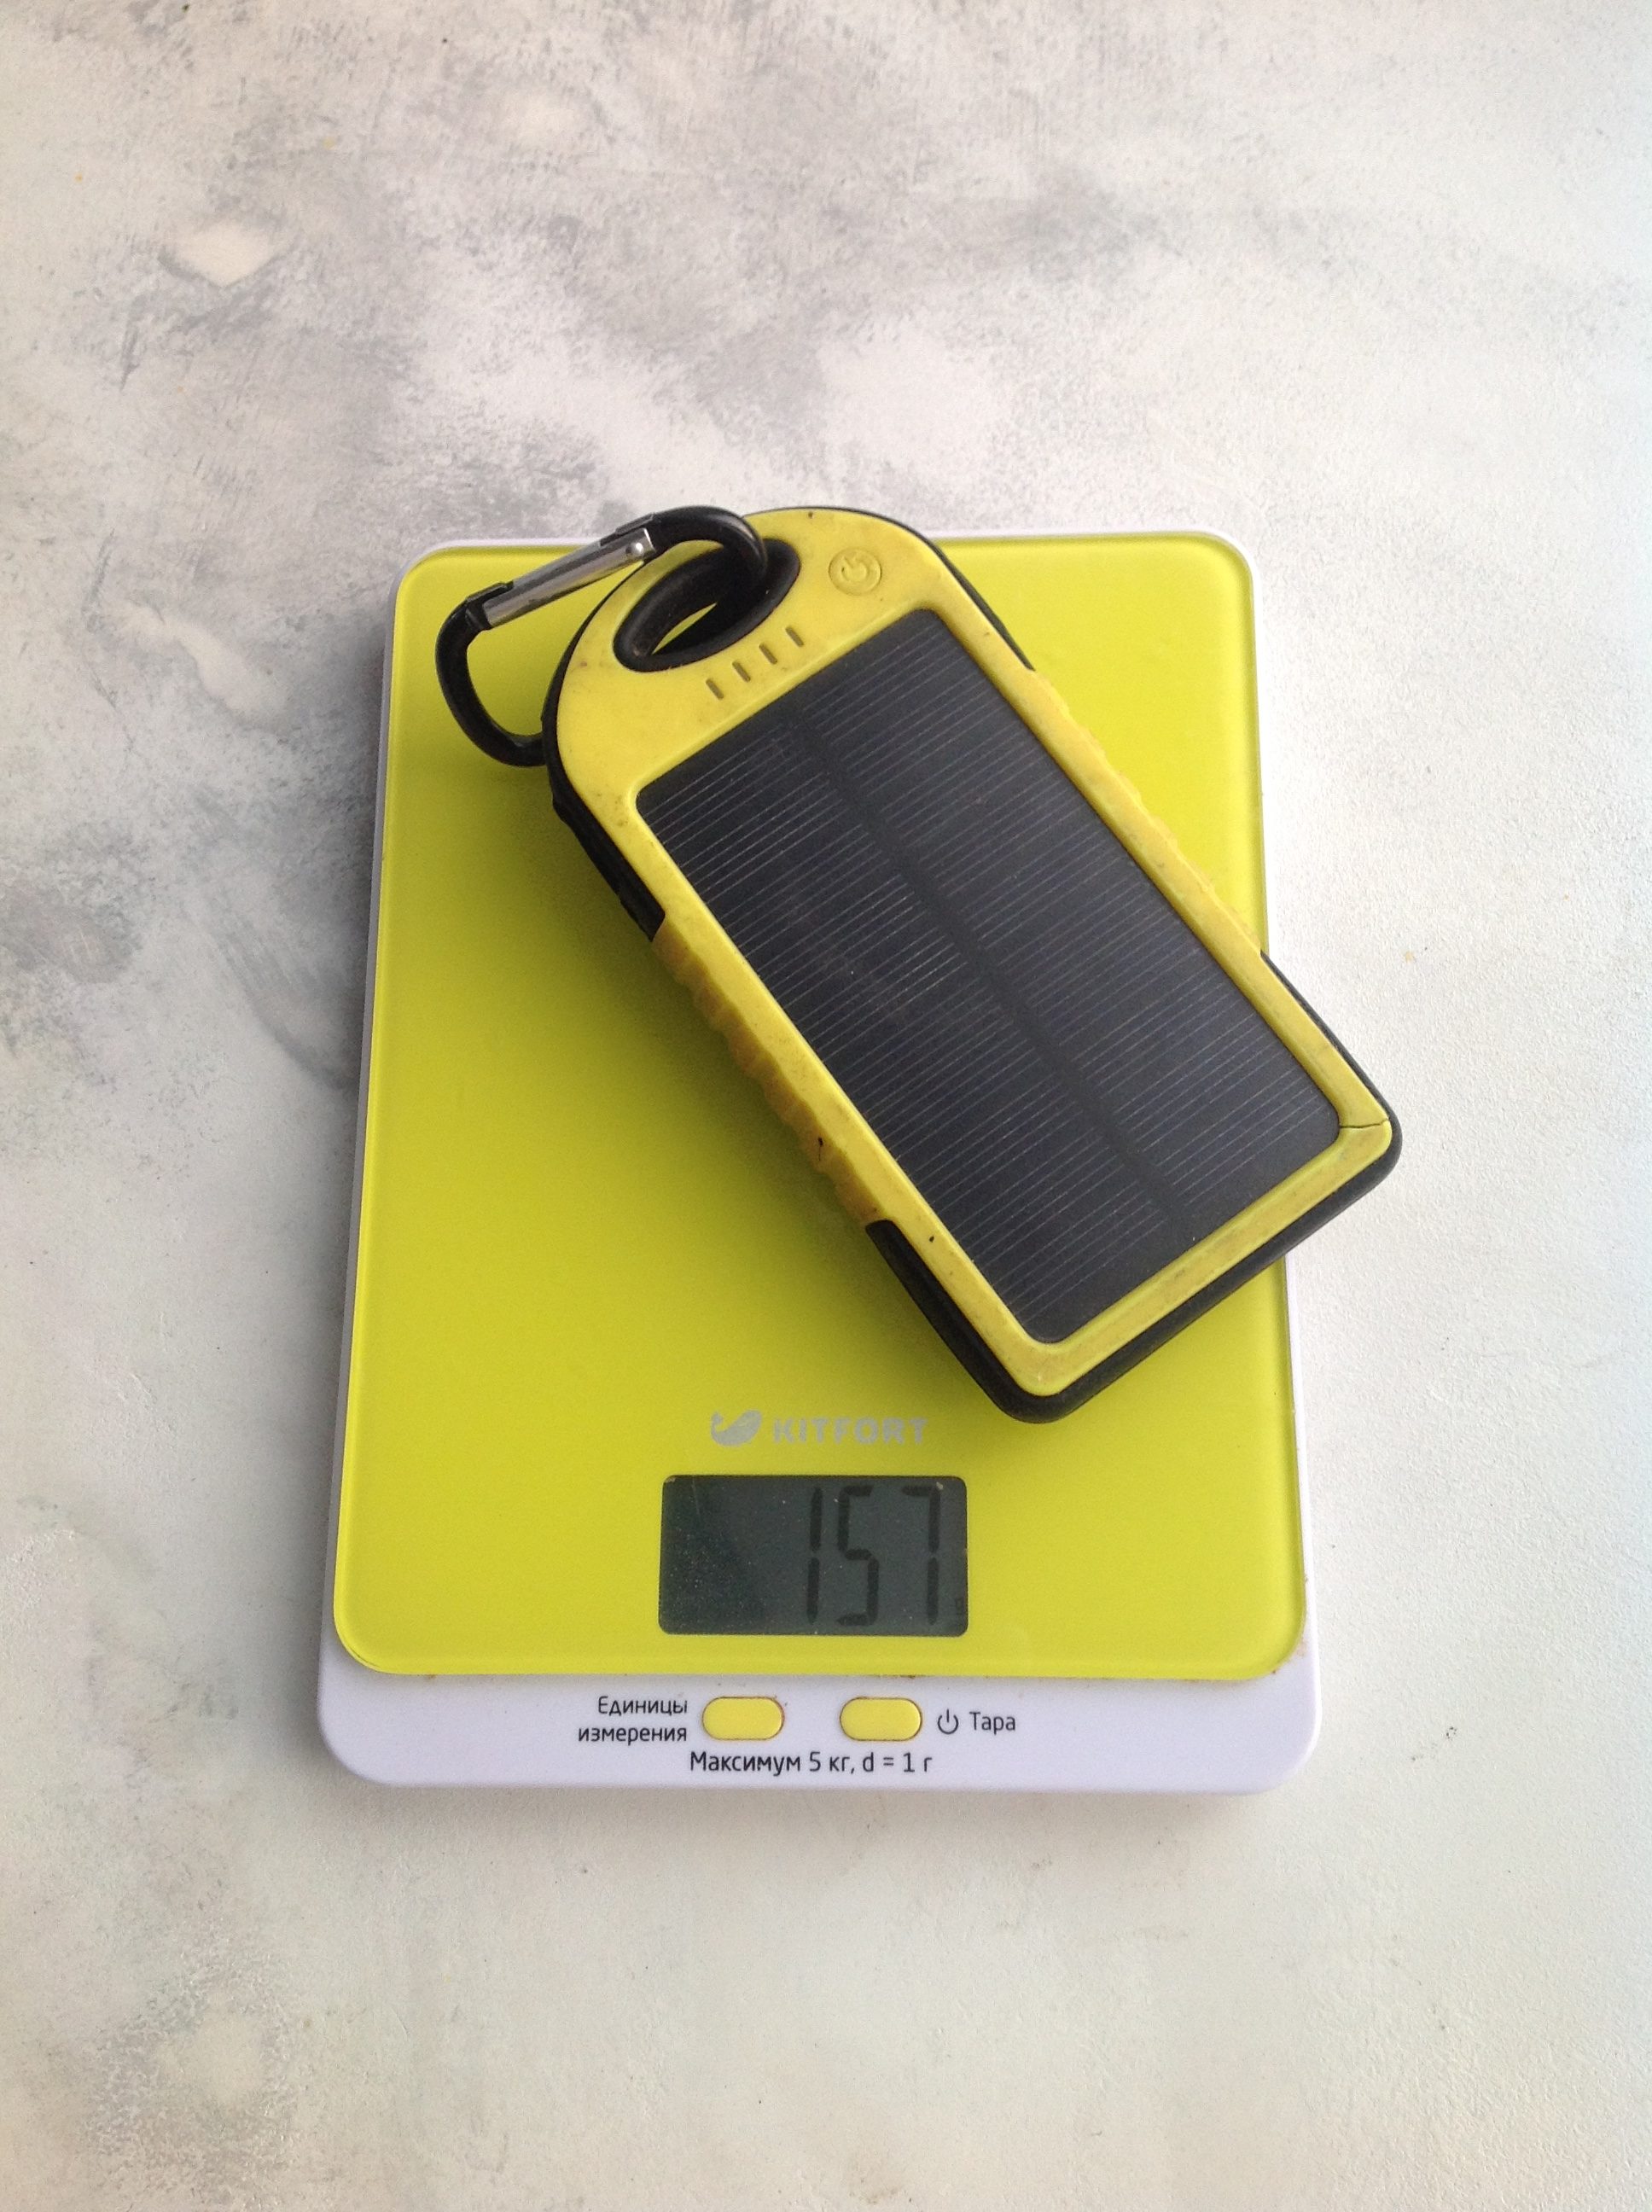 the weight of the external solar battery